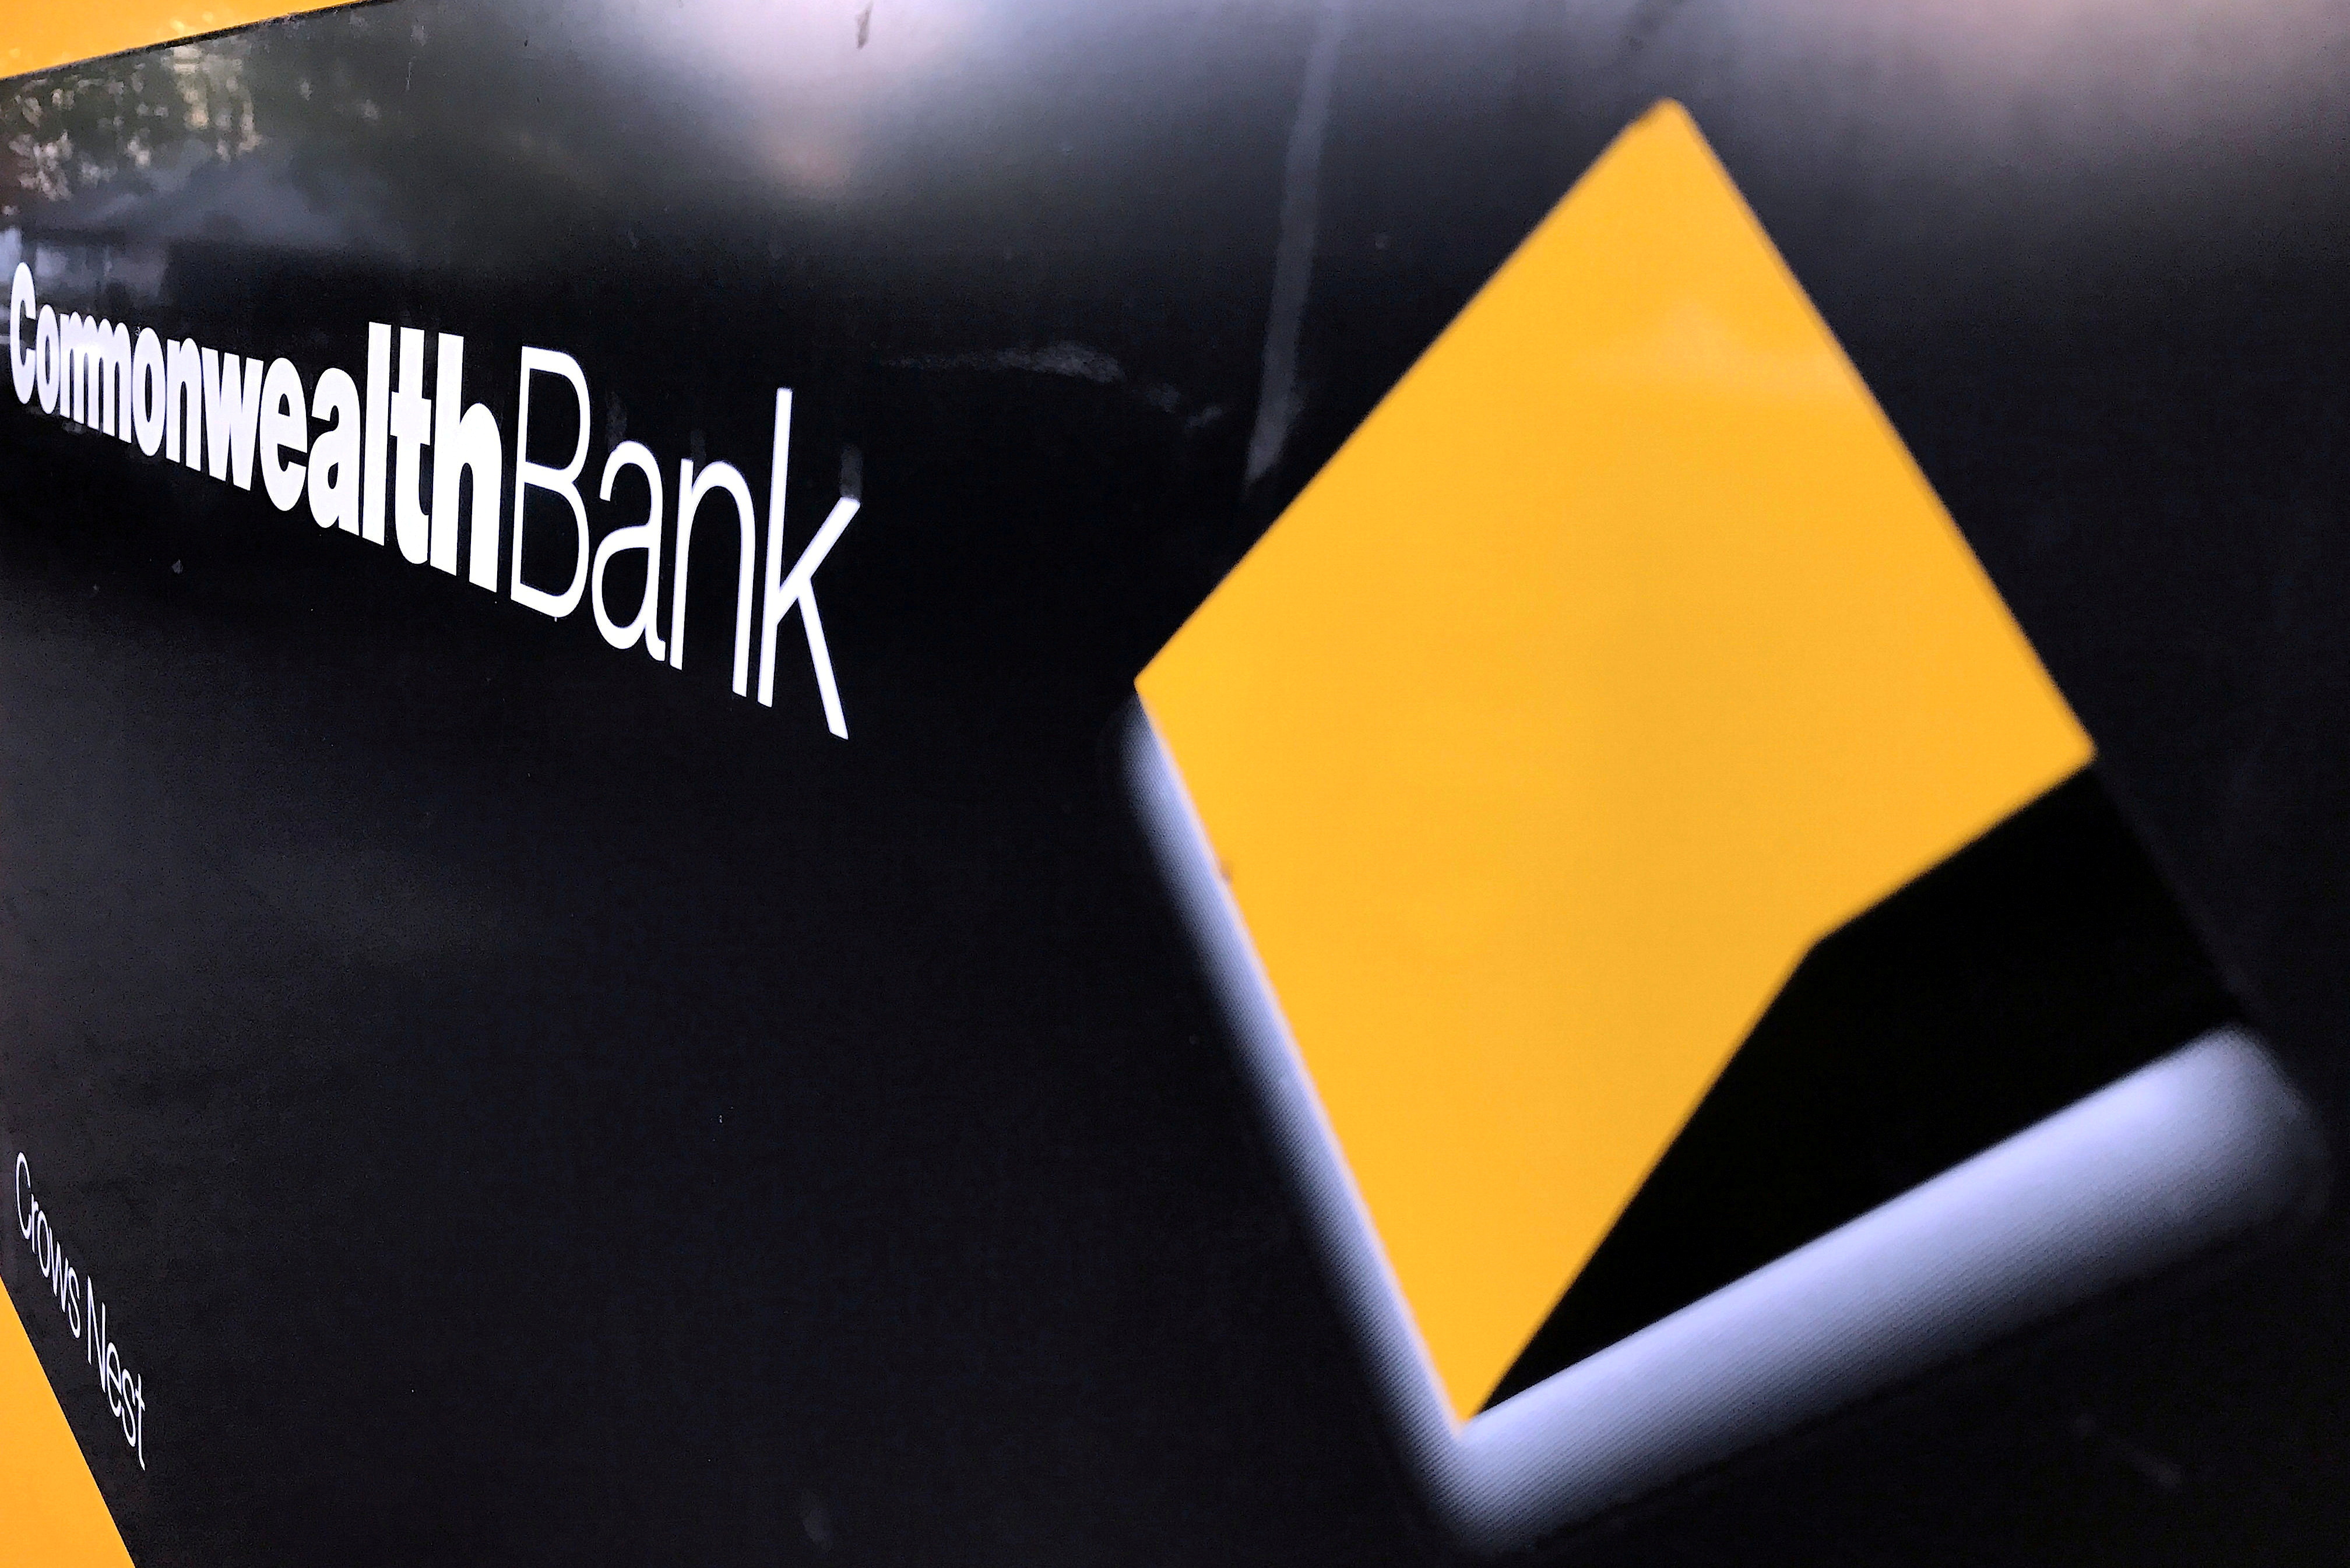 A Commonwealth Bank of Australia logo adorns the wall of a branch in Sydney, Australia